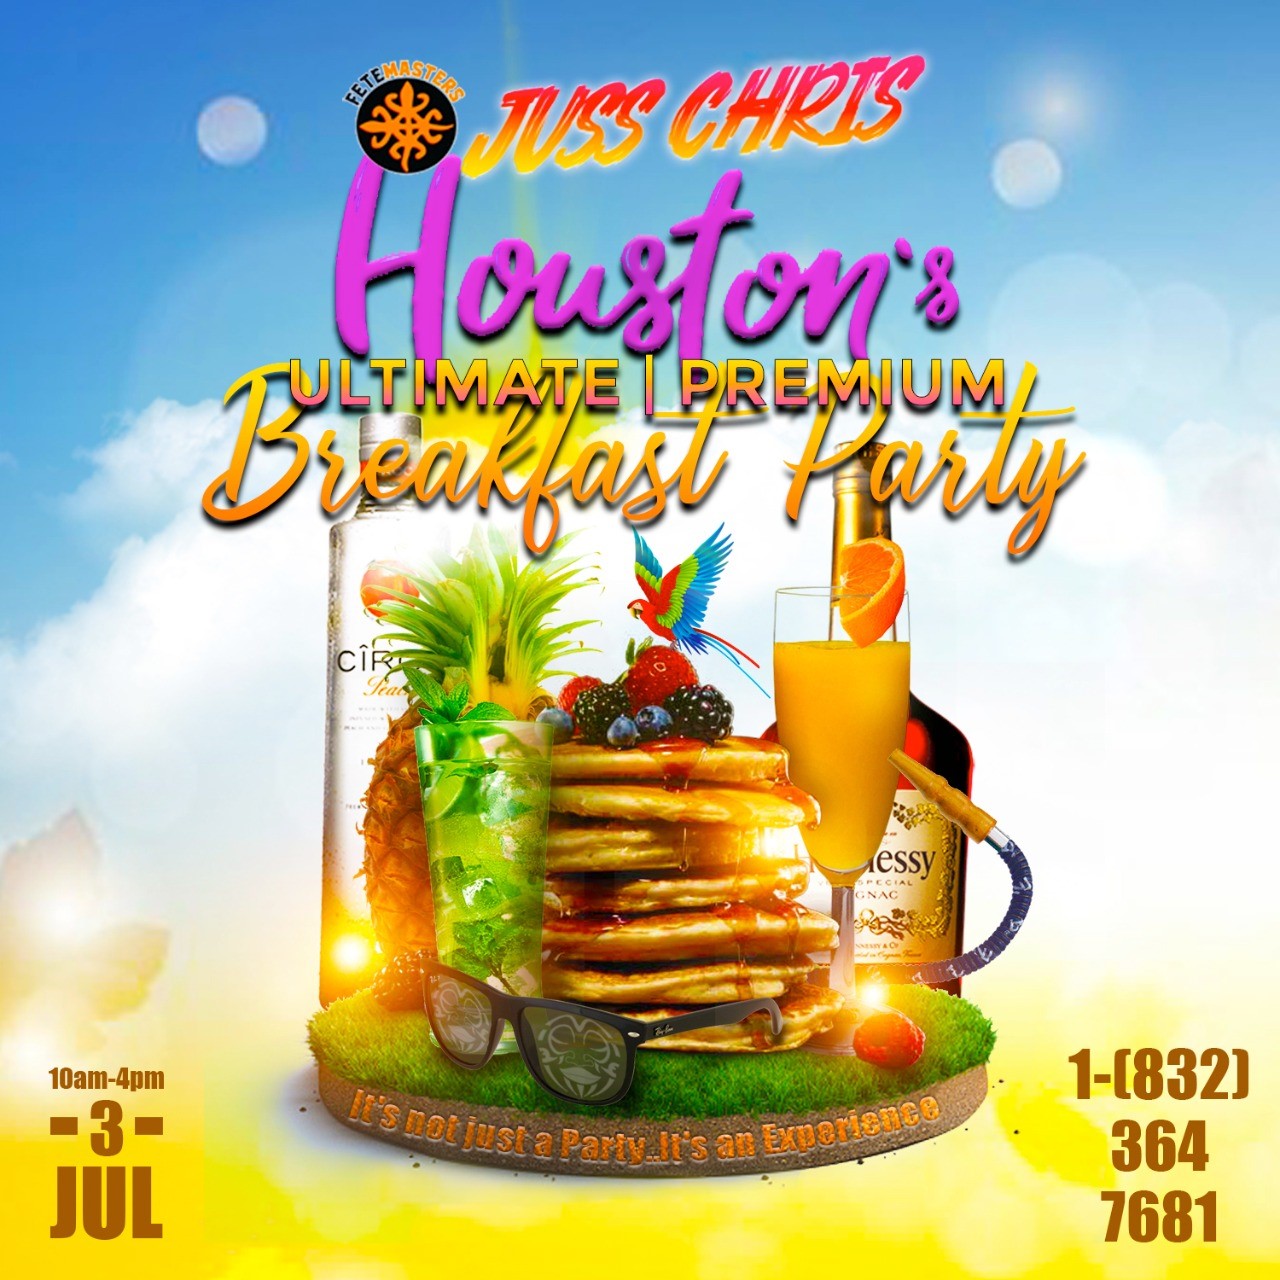 Juss Chris Breakfast Party  on jul. 03, 10:00@Housto - Buy tickets and Get information on www.fetefinders.com tickets.fetefinders.com